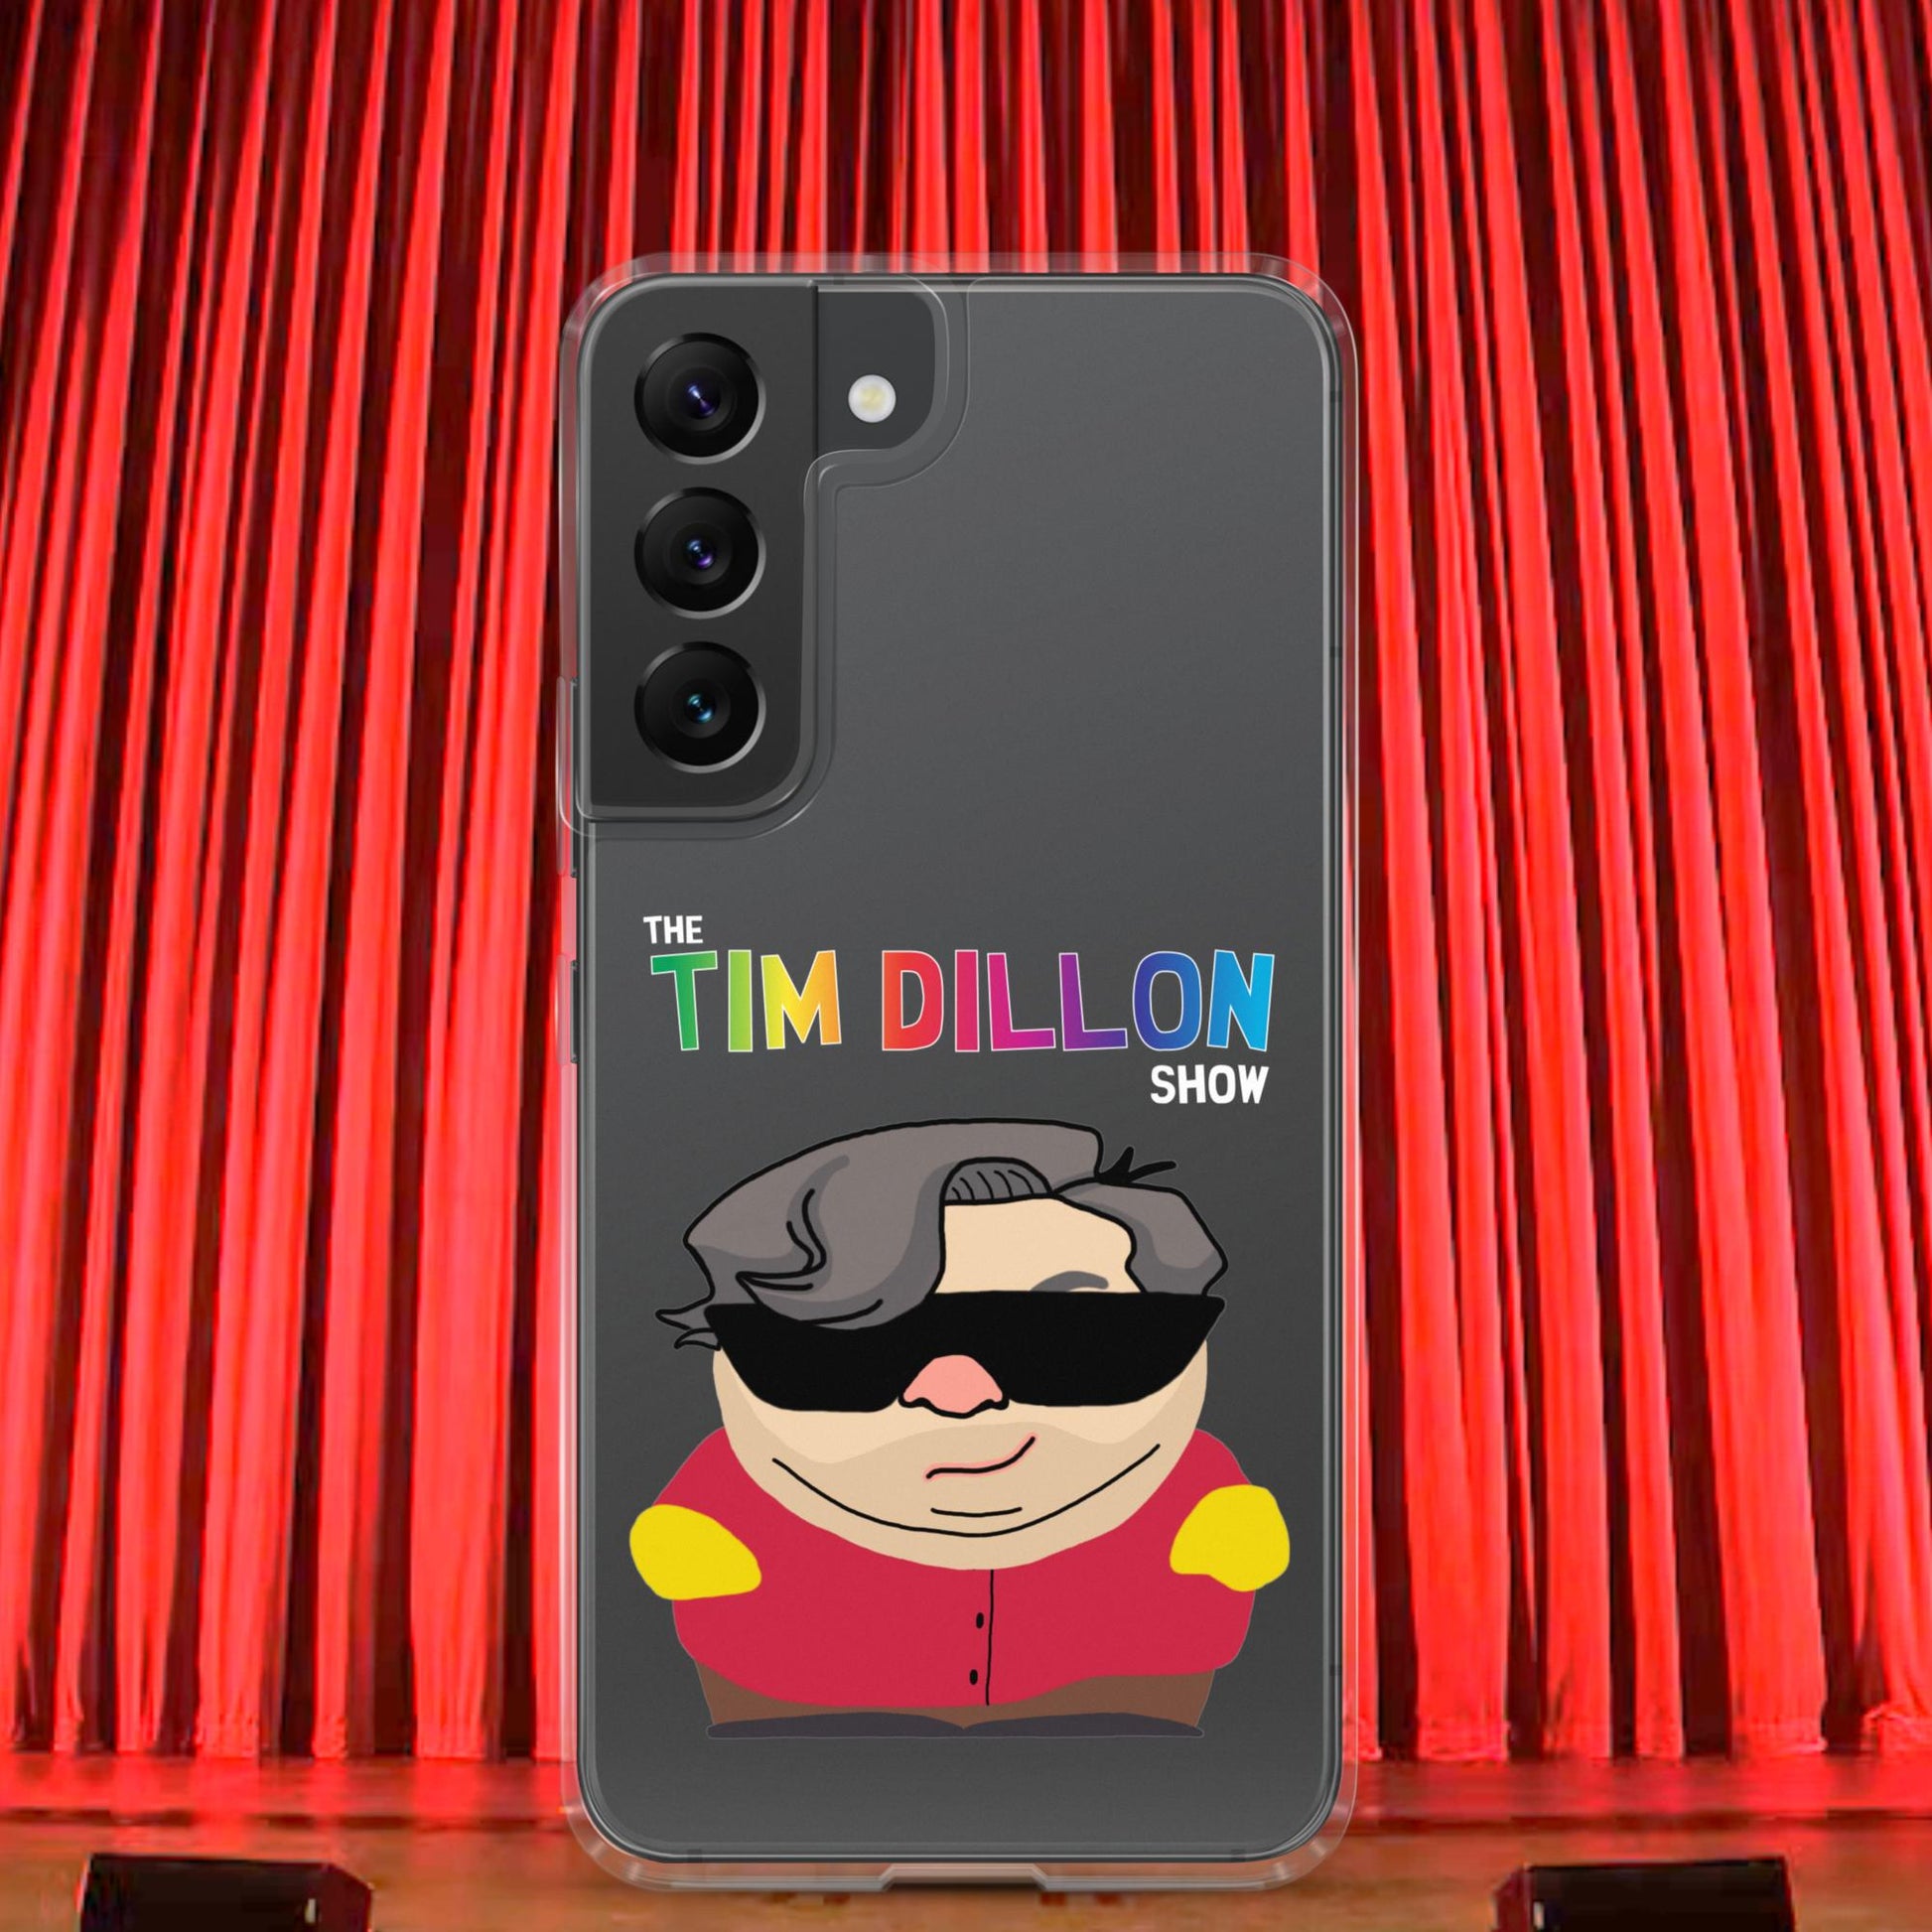 Tim Dillon Cartman, Southpark, The Tim Dillon Show, Tim Dillon Podcast, Tim Dillon Merch, Tim Dillon Clear Case for Samsung Next Cult Brand Podcasts, Stand-up Comedy, Tim Dillon